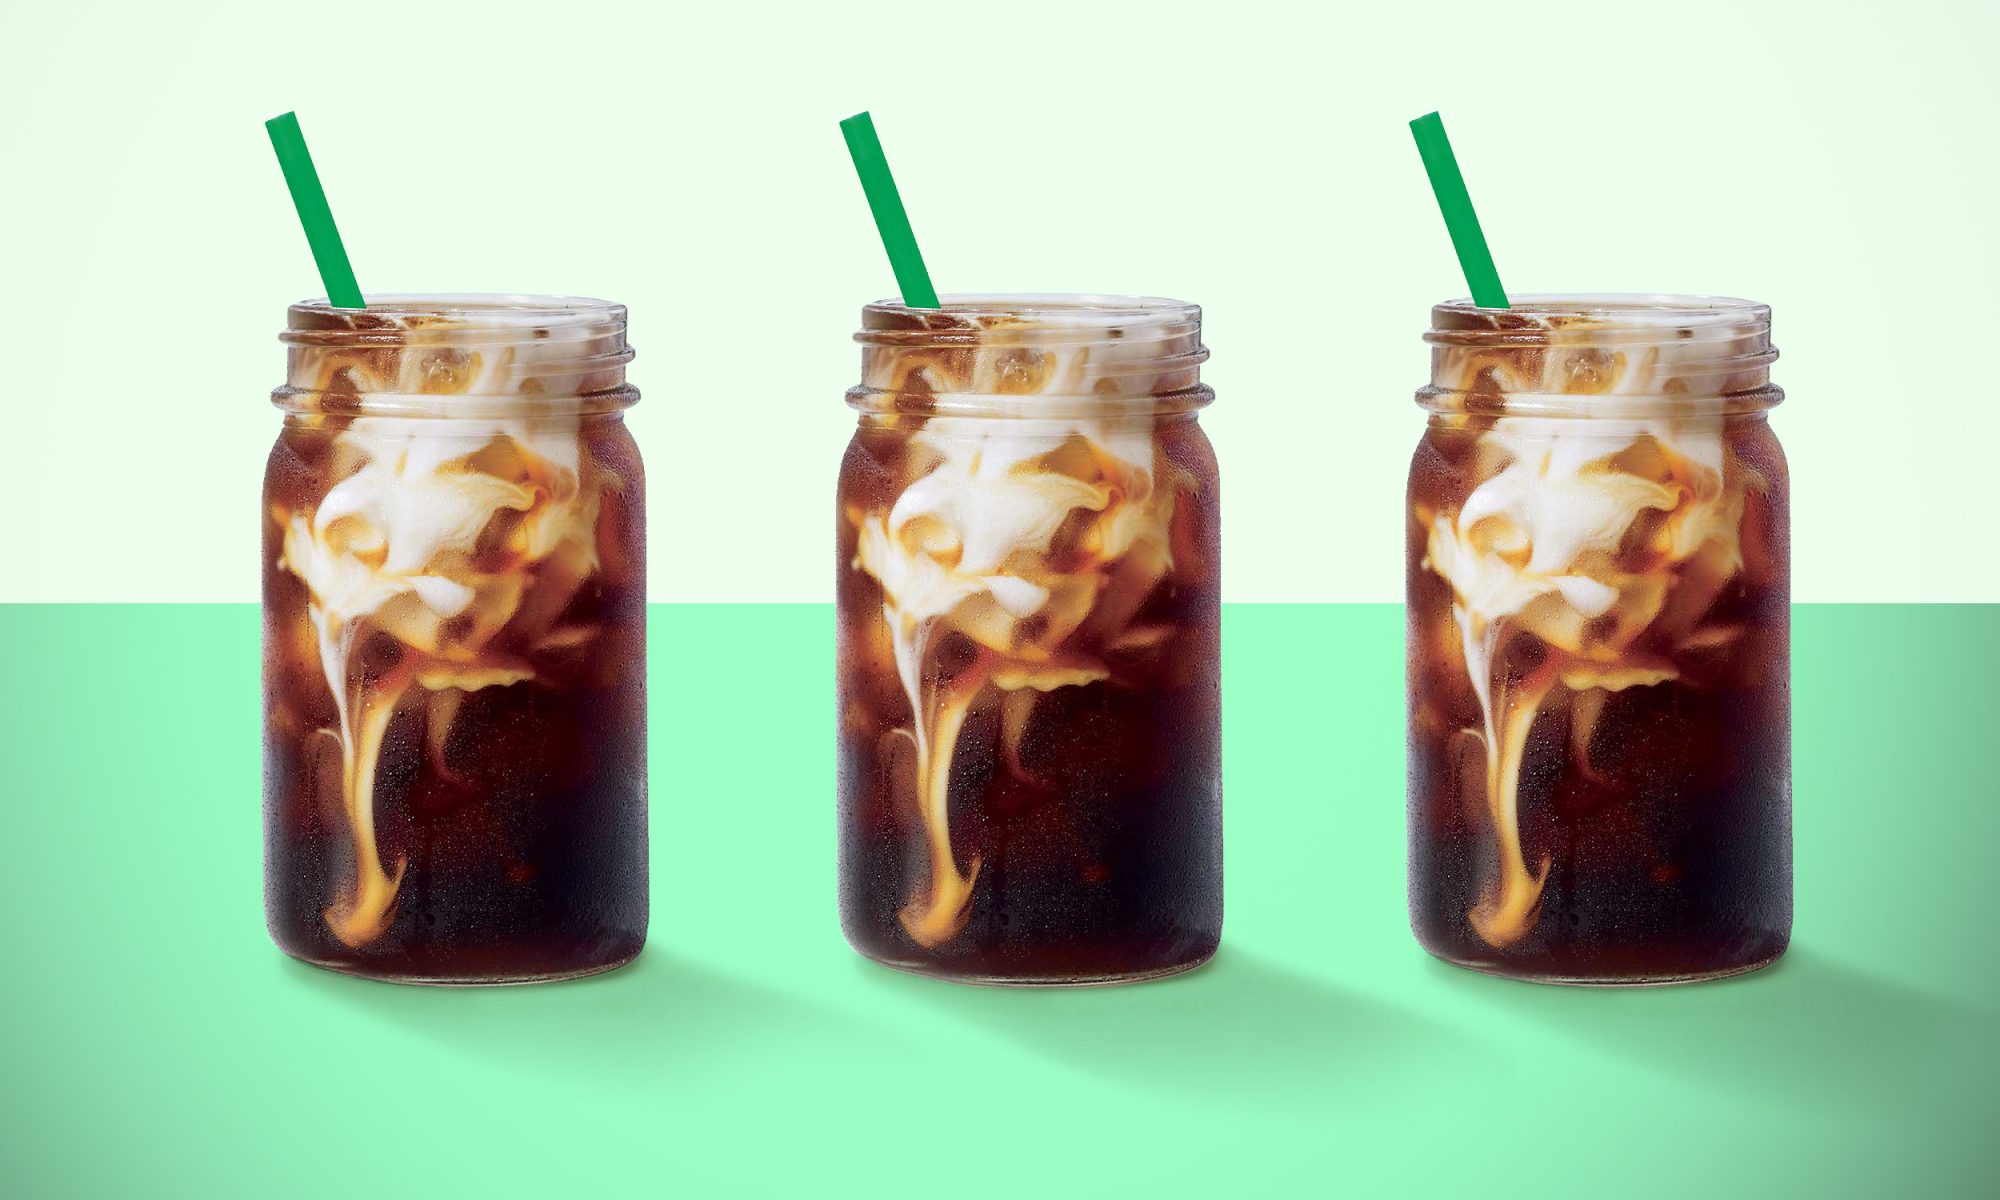 EC: This New Starbucks Drink Is Coconut-Flavored Cold Brew